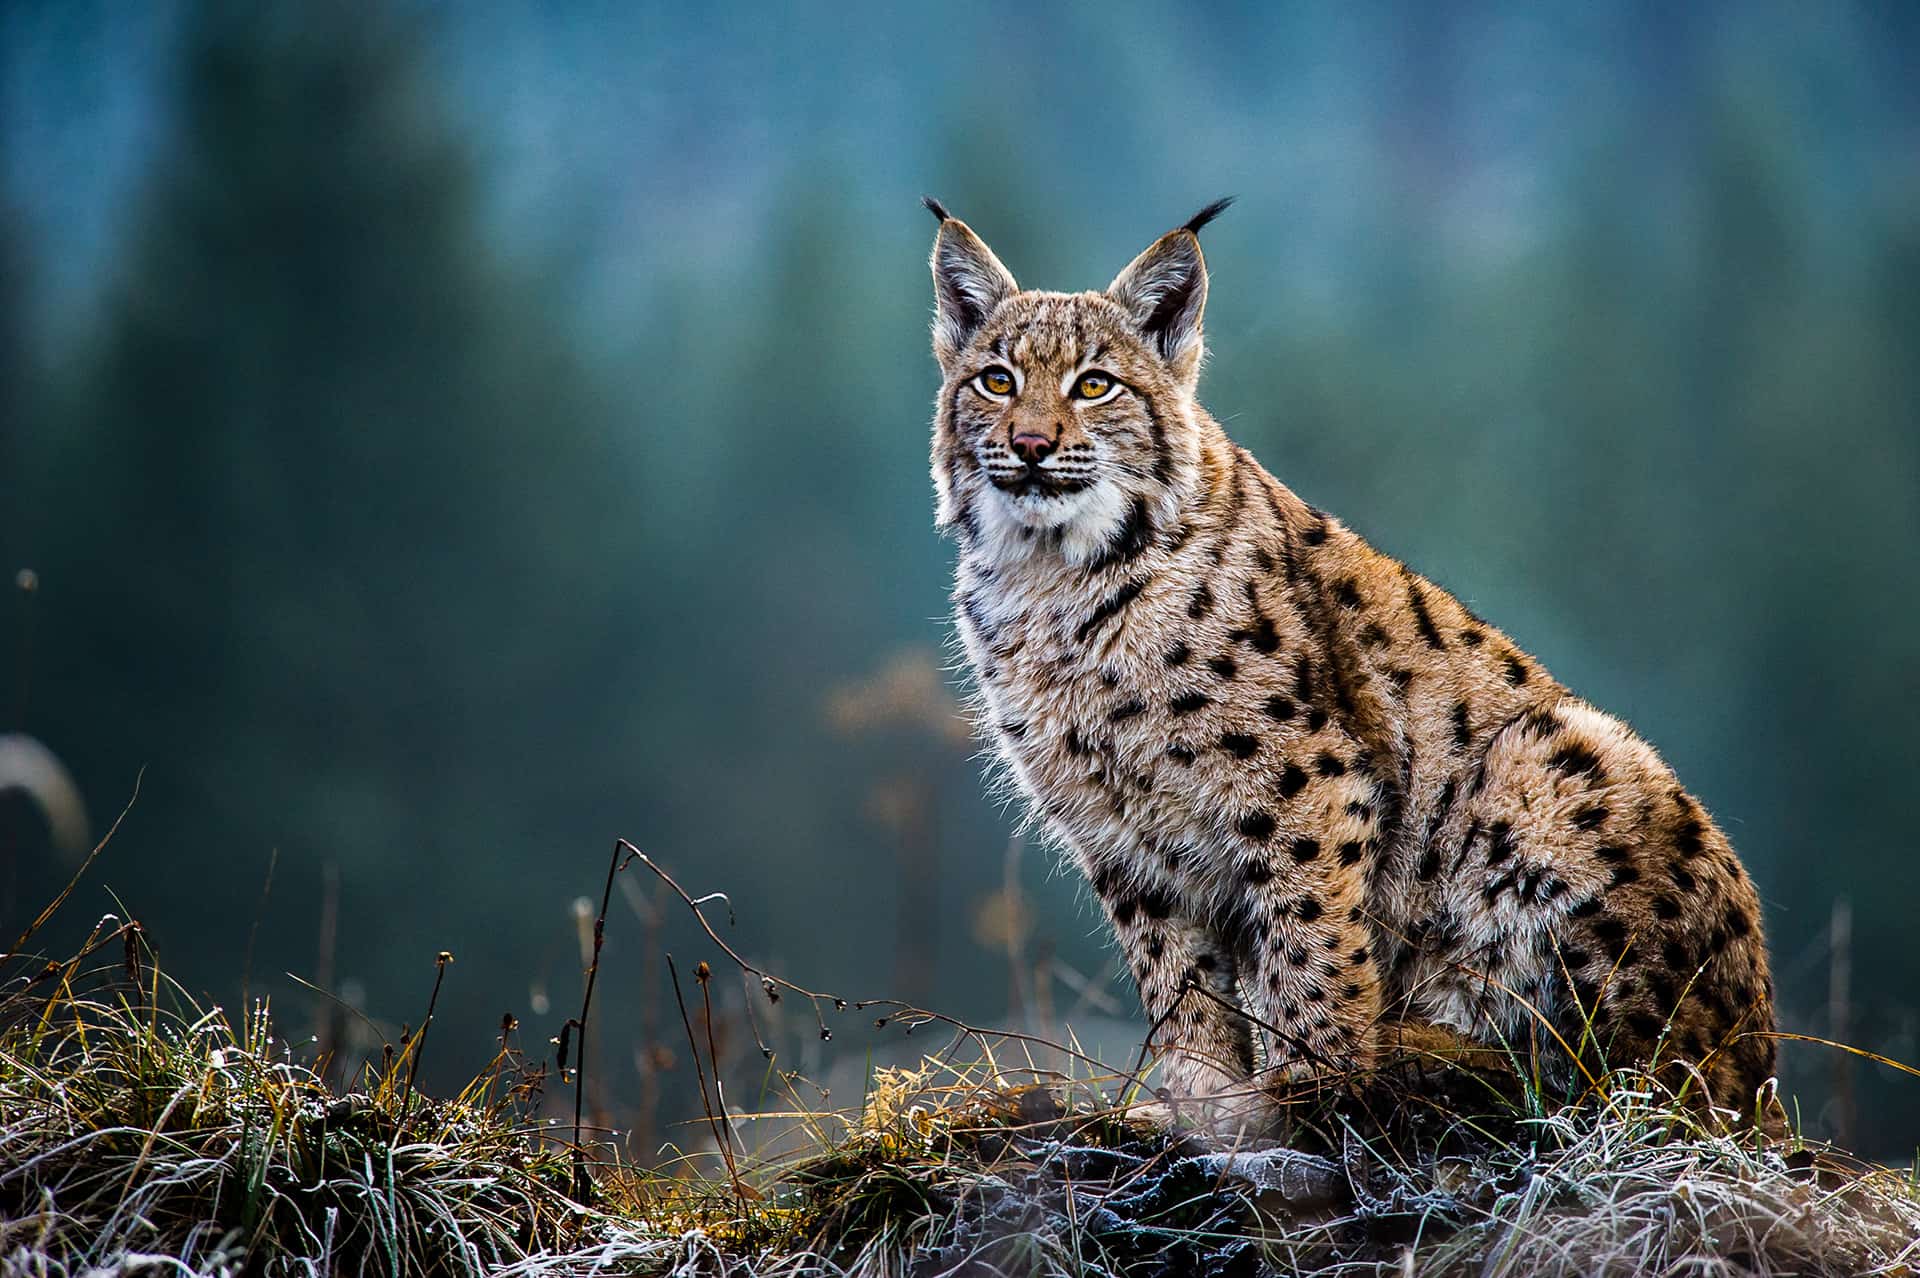 A Eurasian Lynx in the wild sitting on grass cover in frost